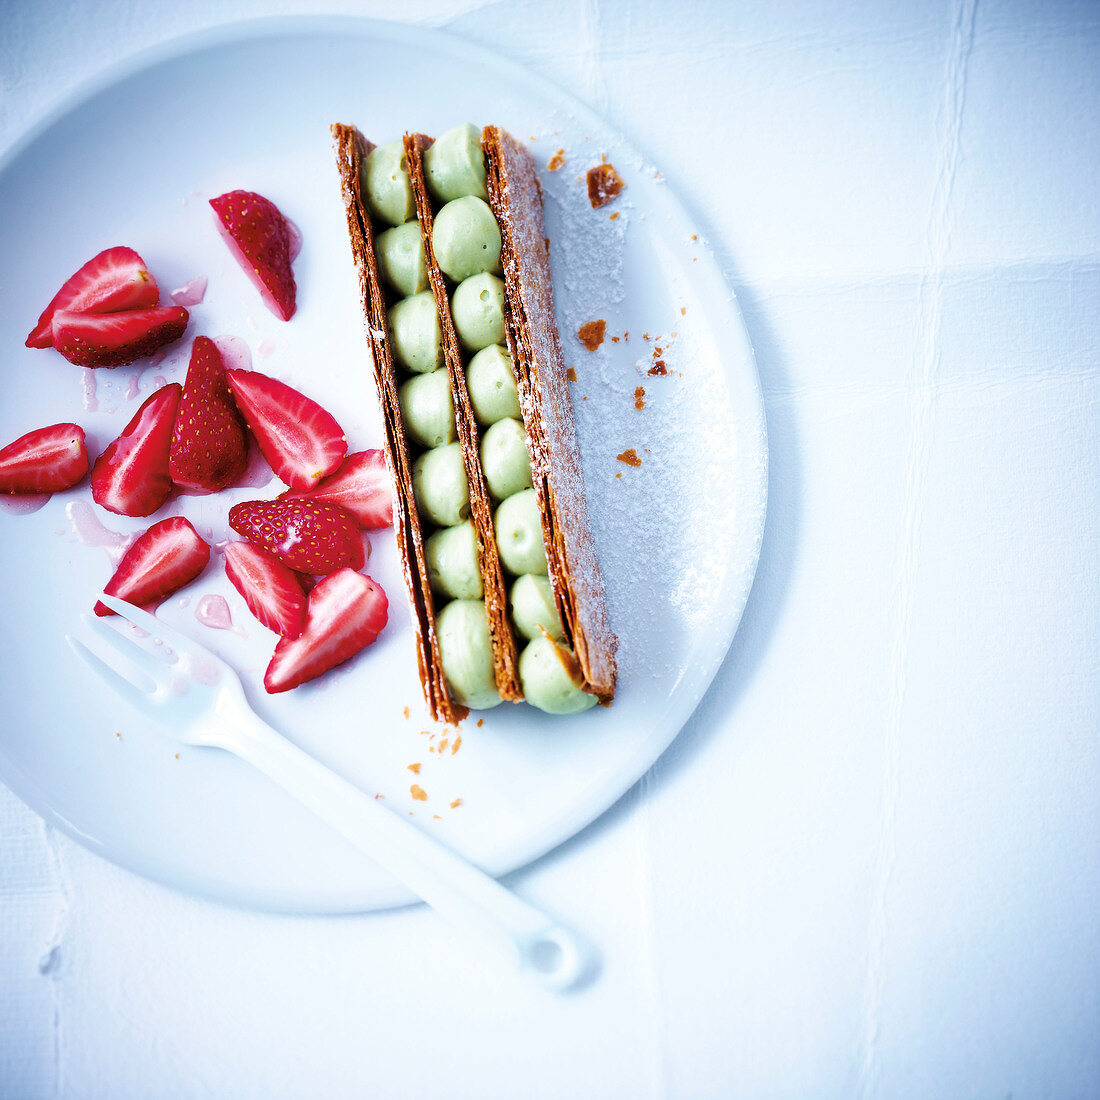 Green tea mousse Mille-feuille with strawberries